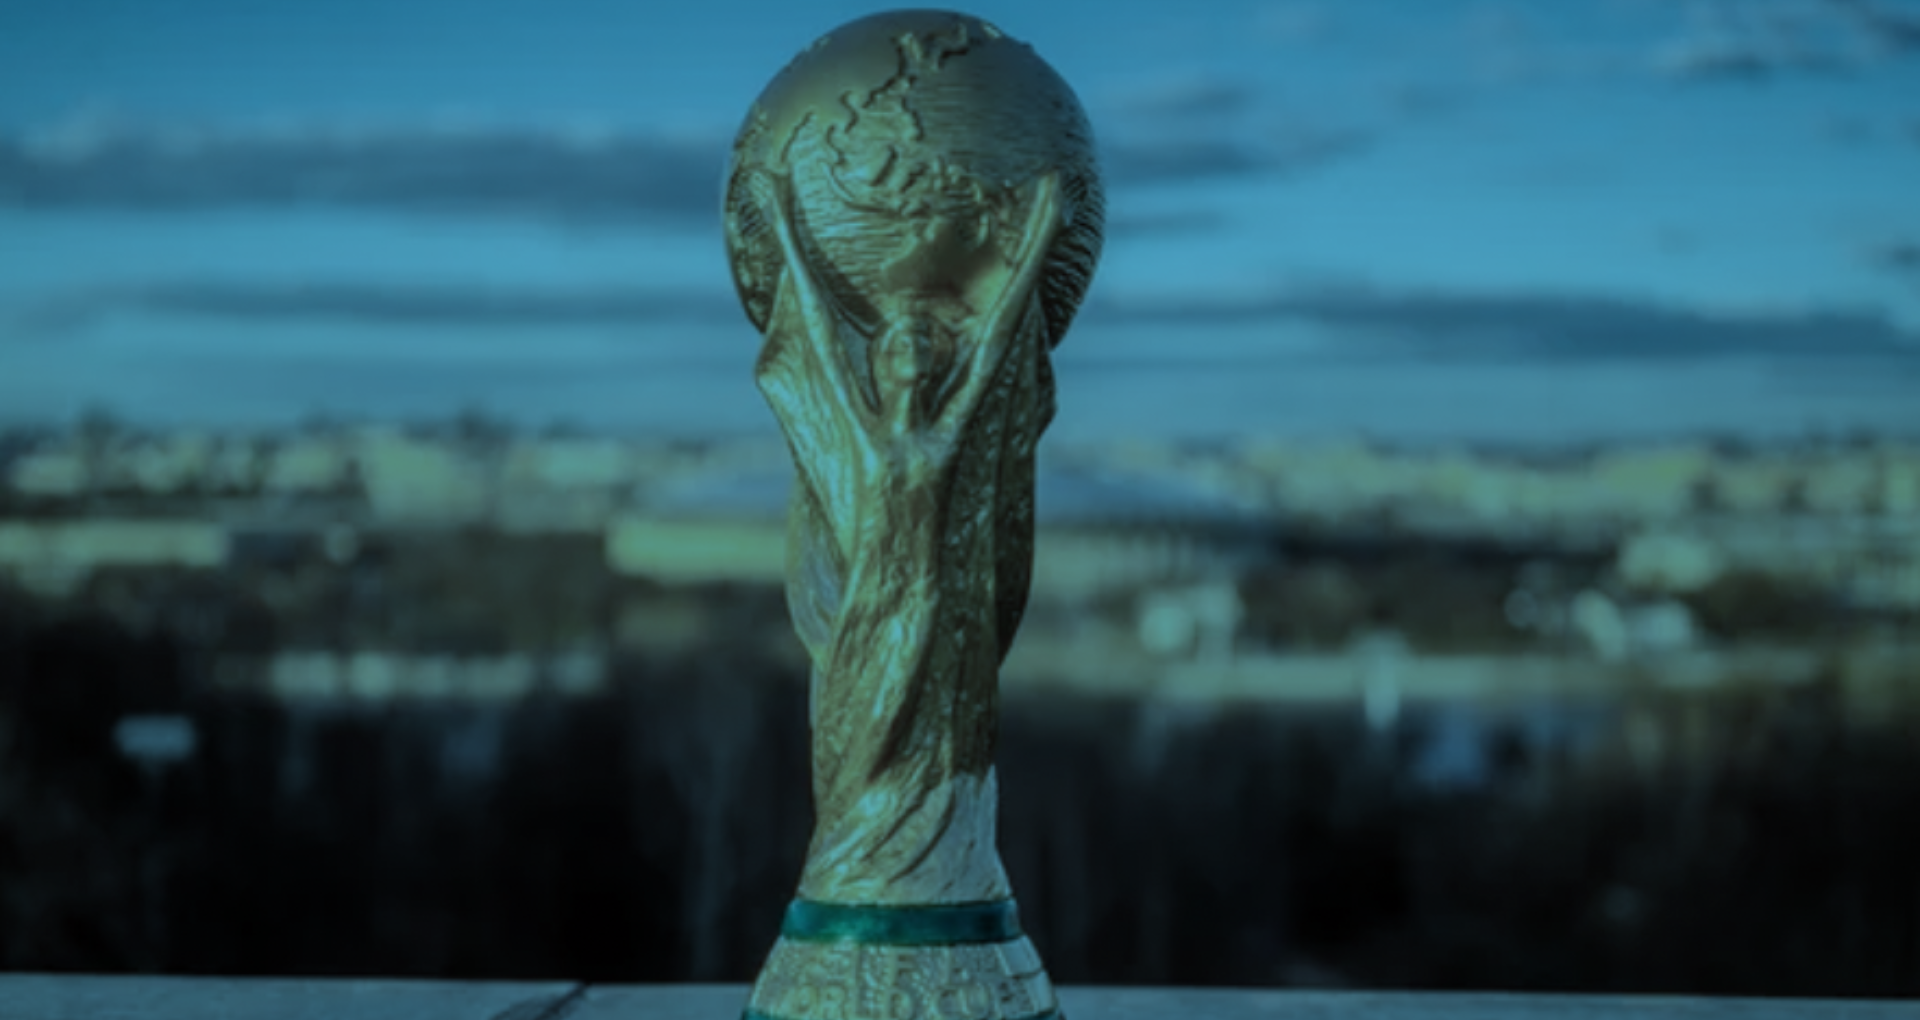 Scale your game app users during FIFA World Cup 2022 with mobile OEM advertising